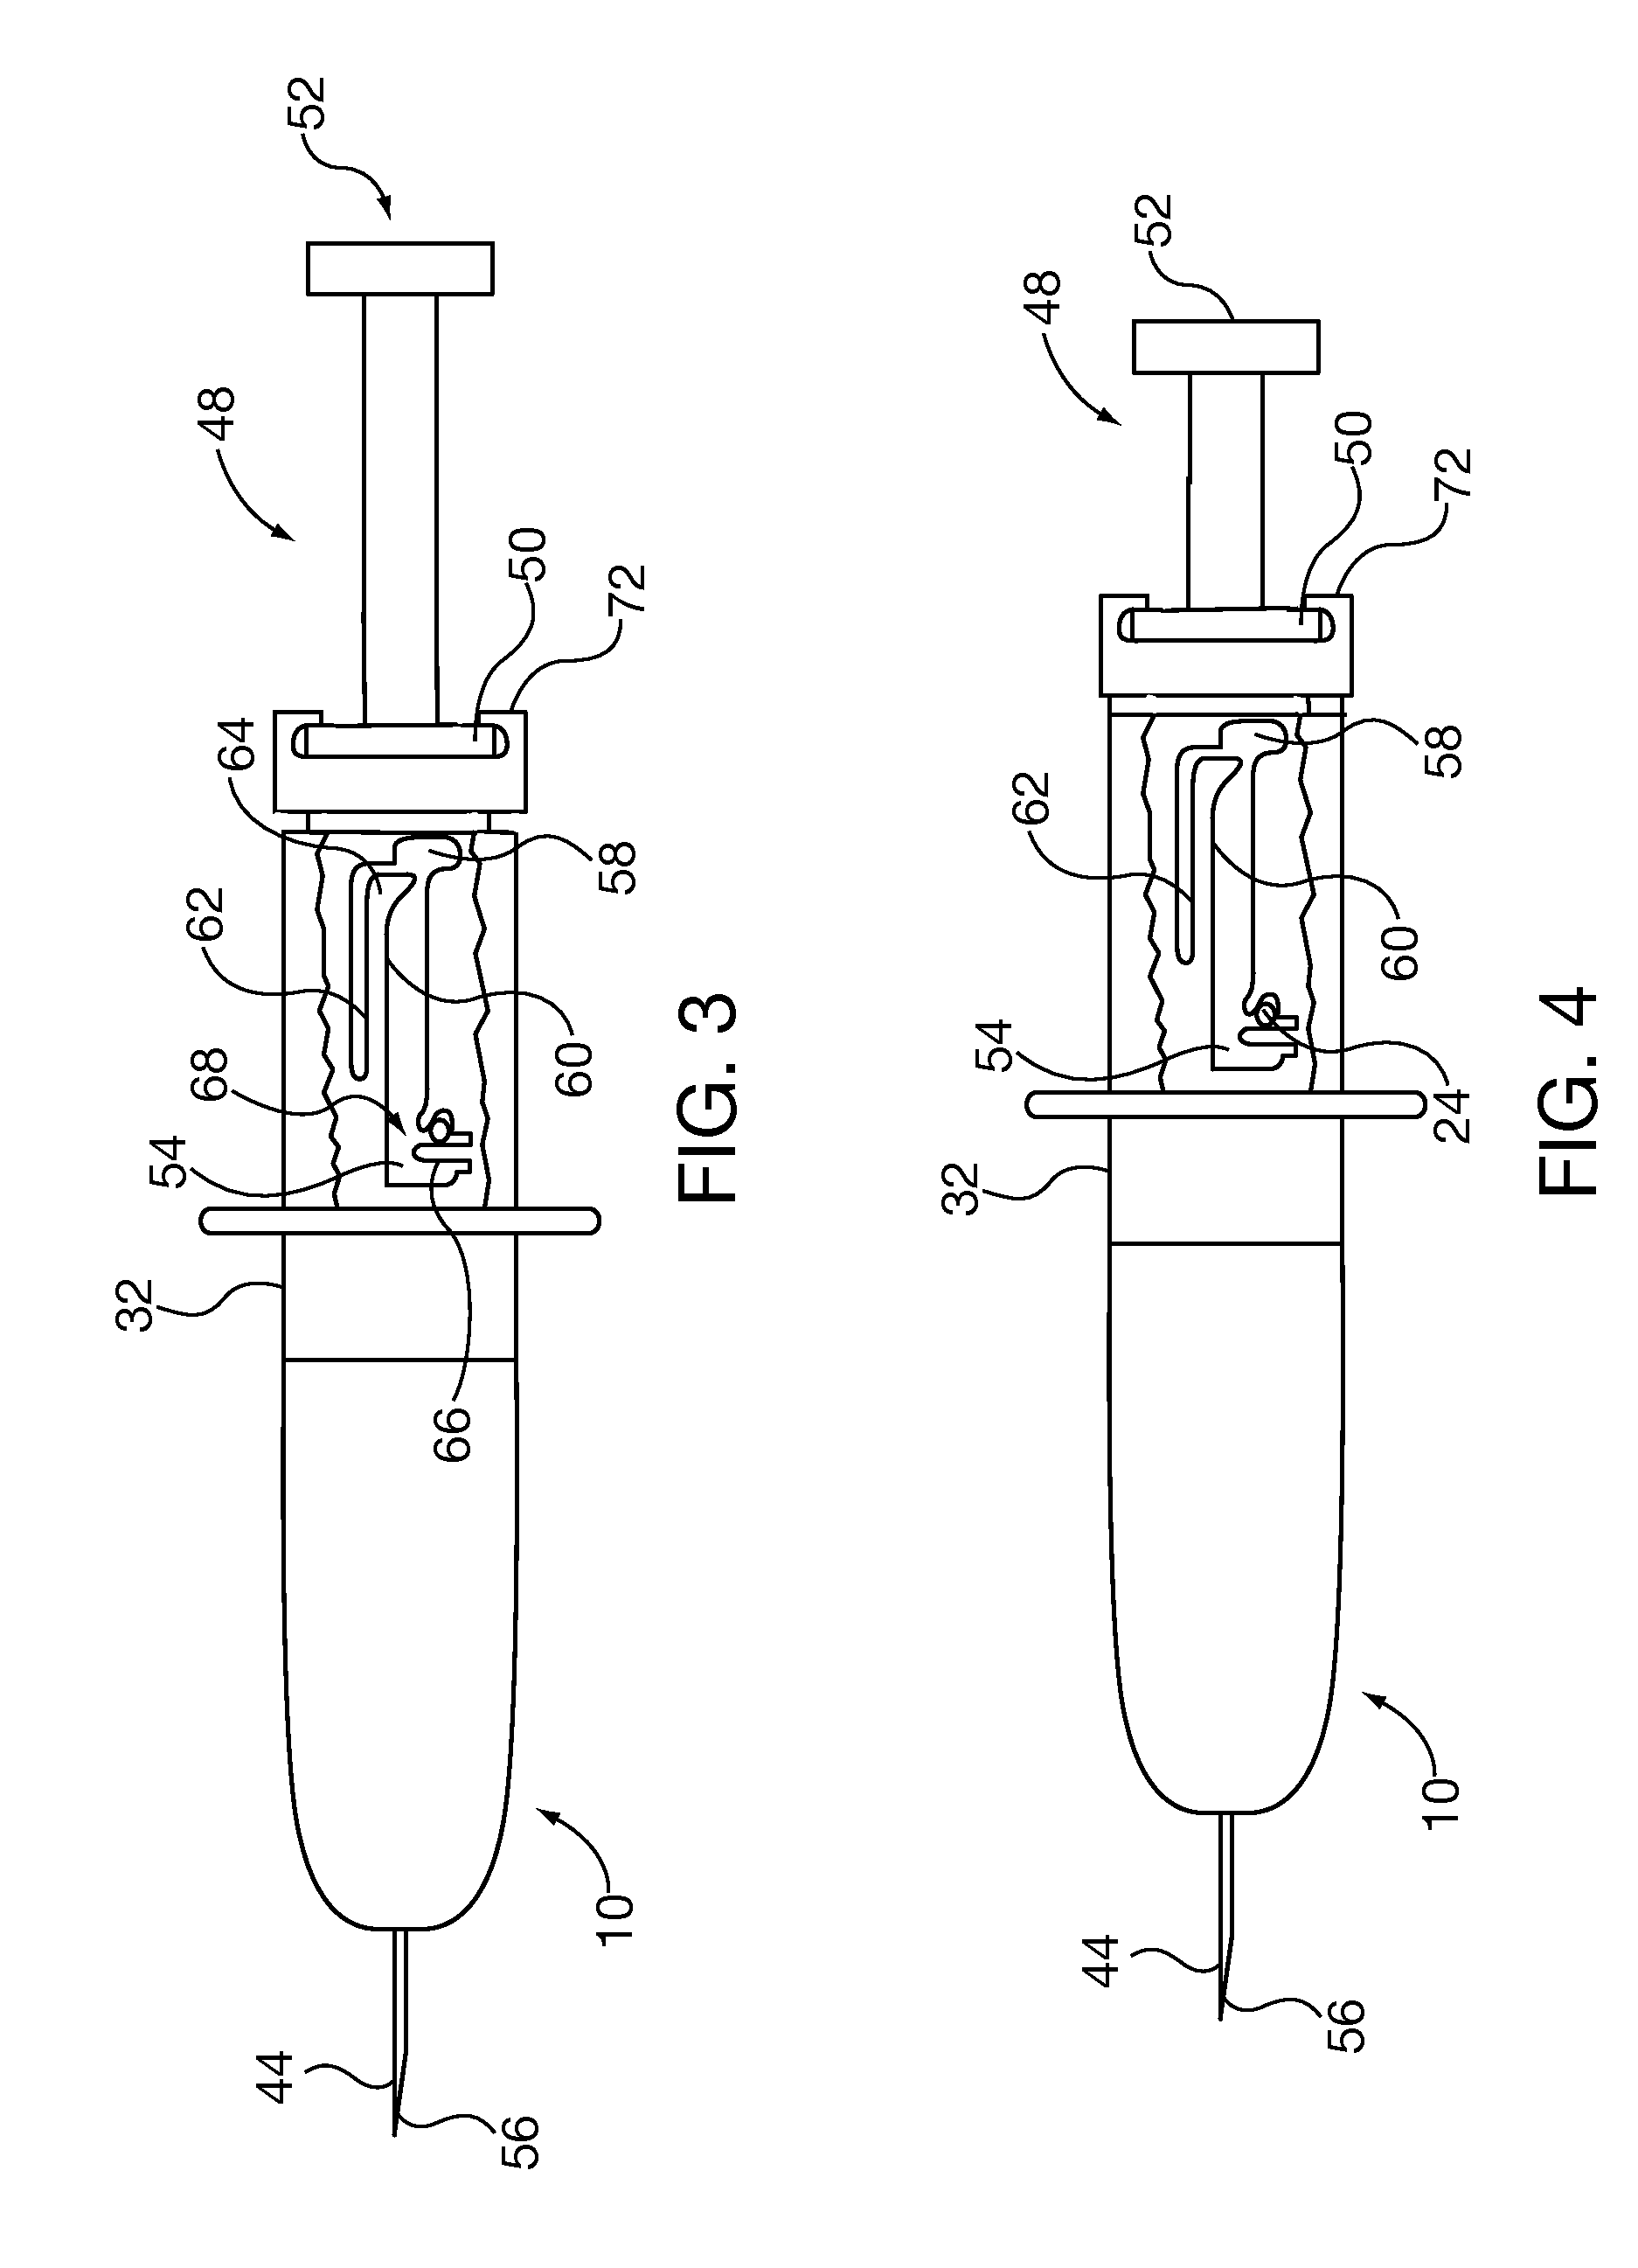 Protective guard for needles of injection devices having removable needle assemblies